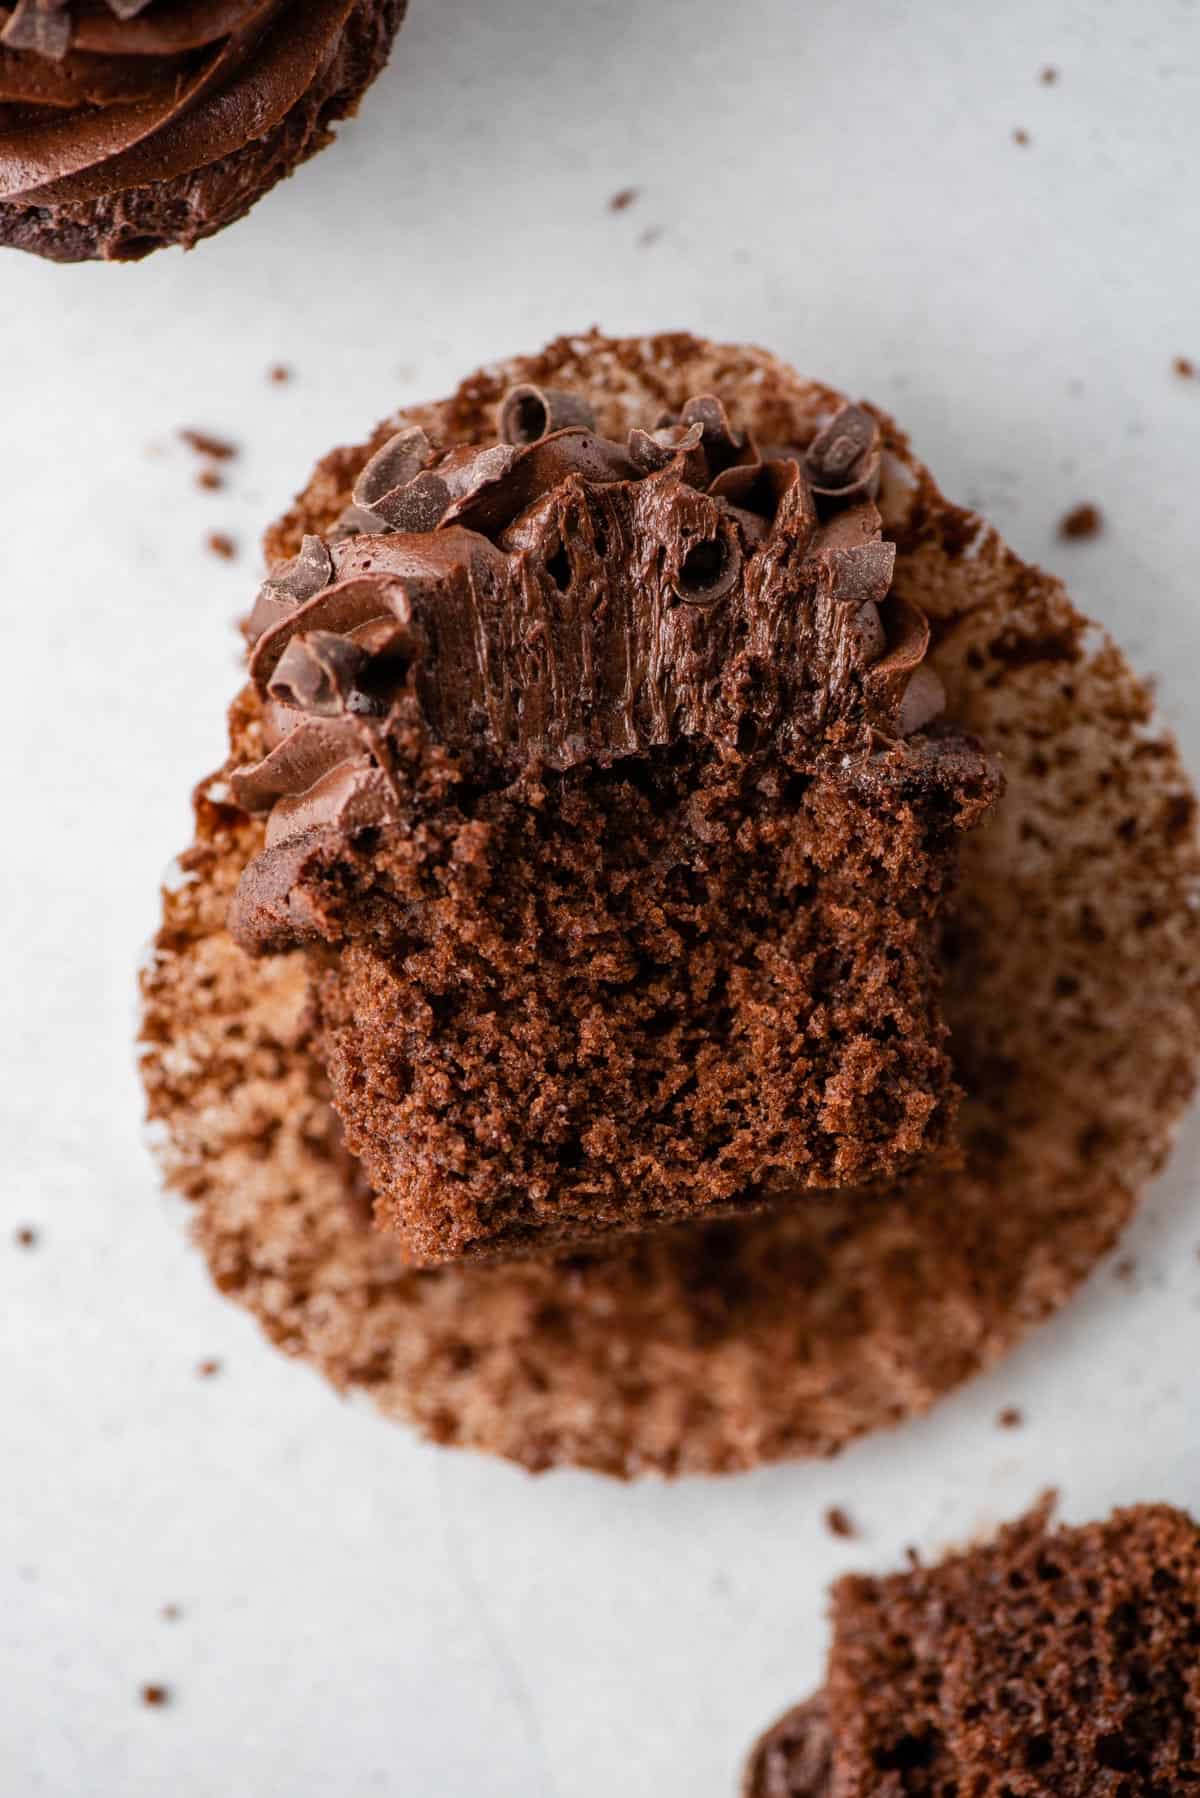 View of a bitten gluten-free chocolate cupcake to show soft, tender cake